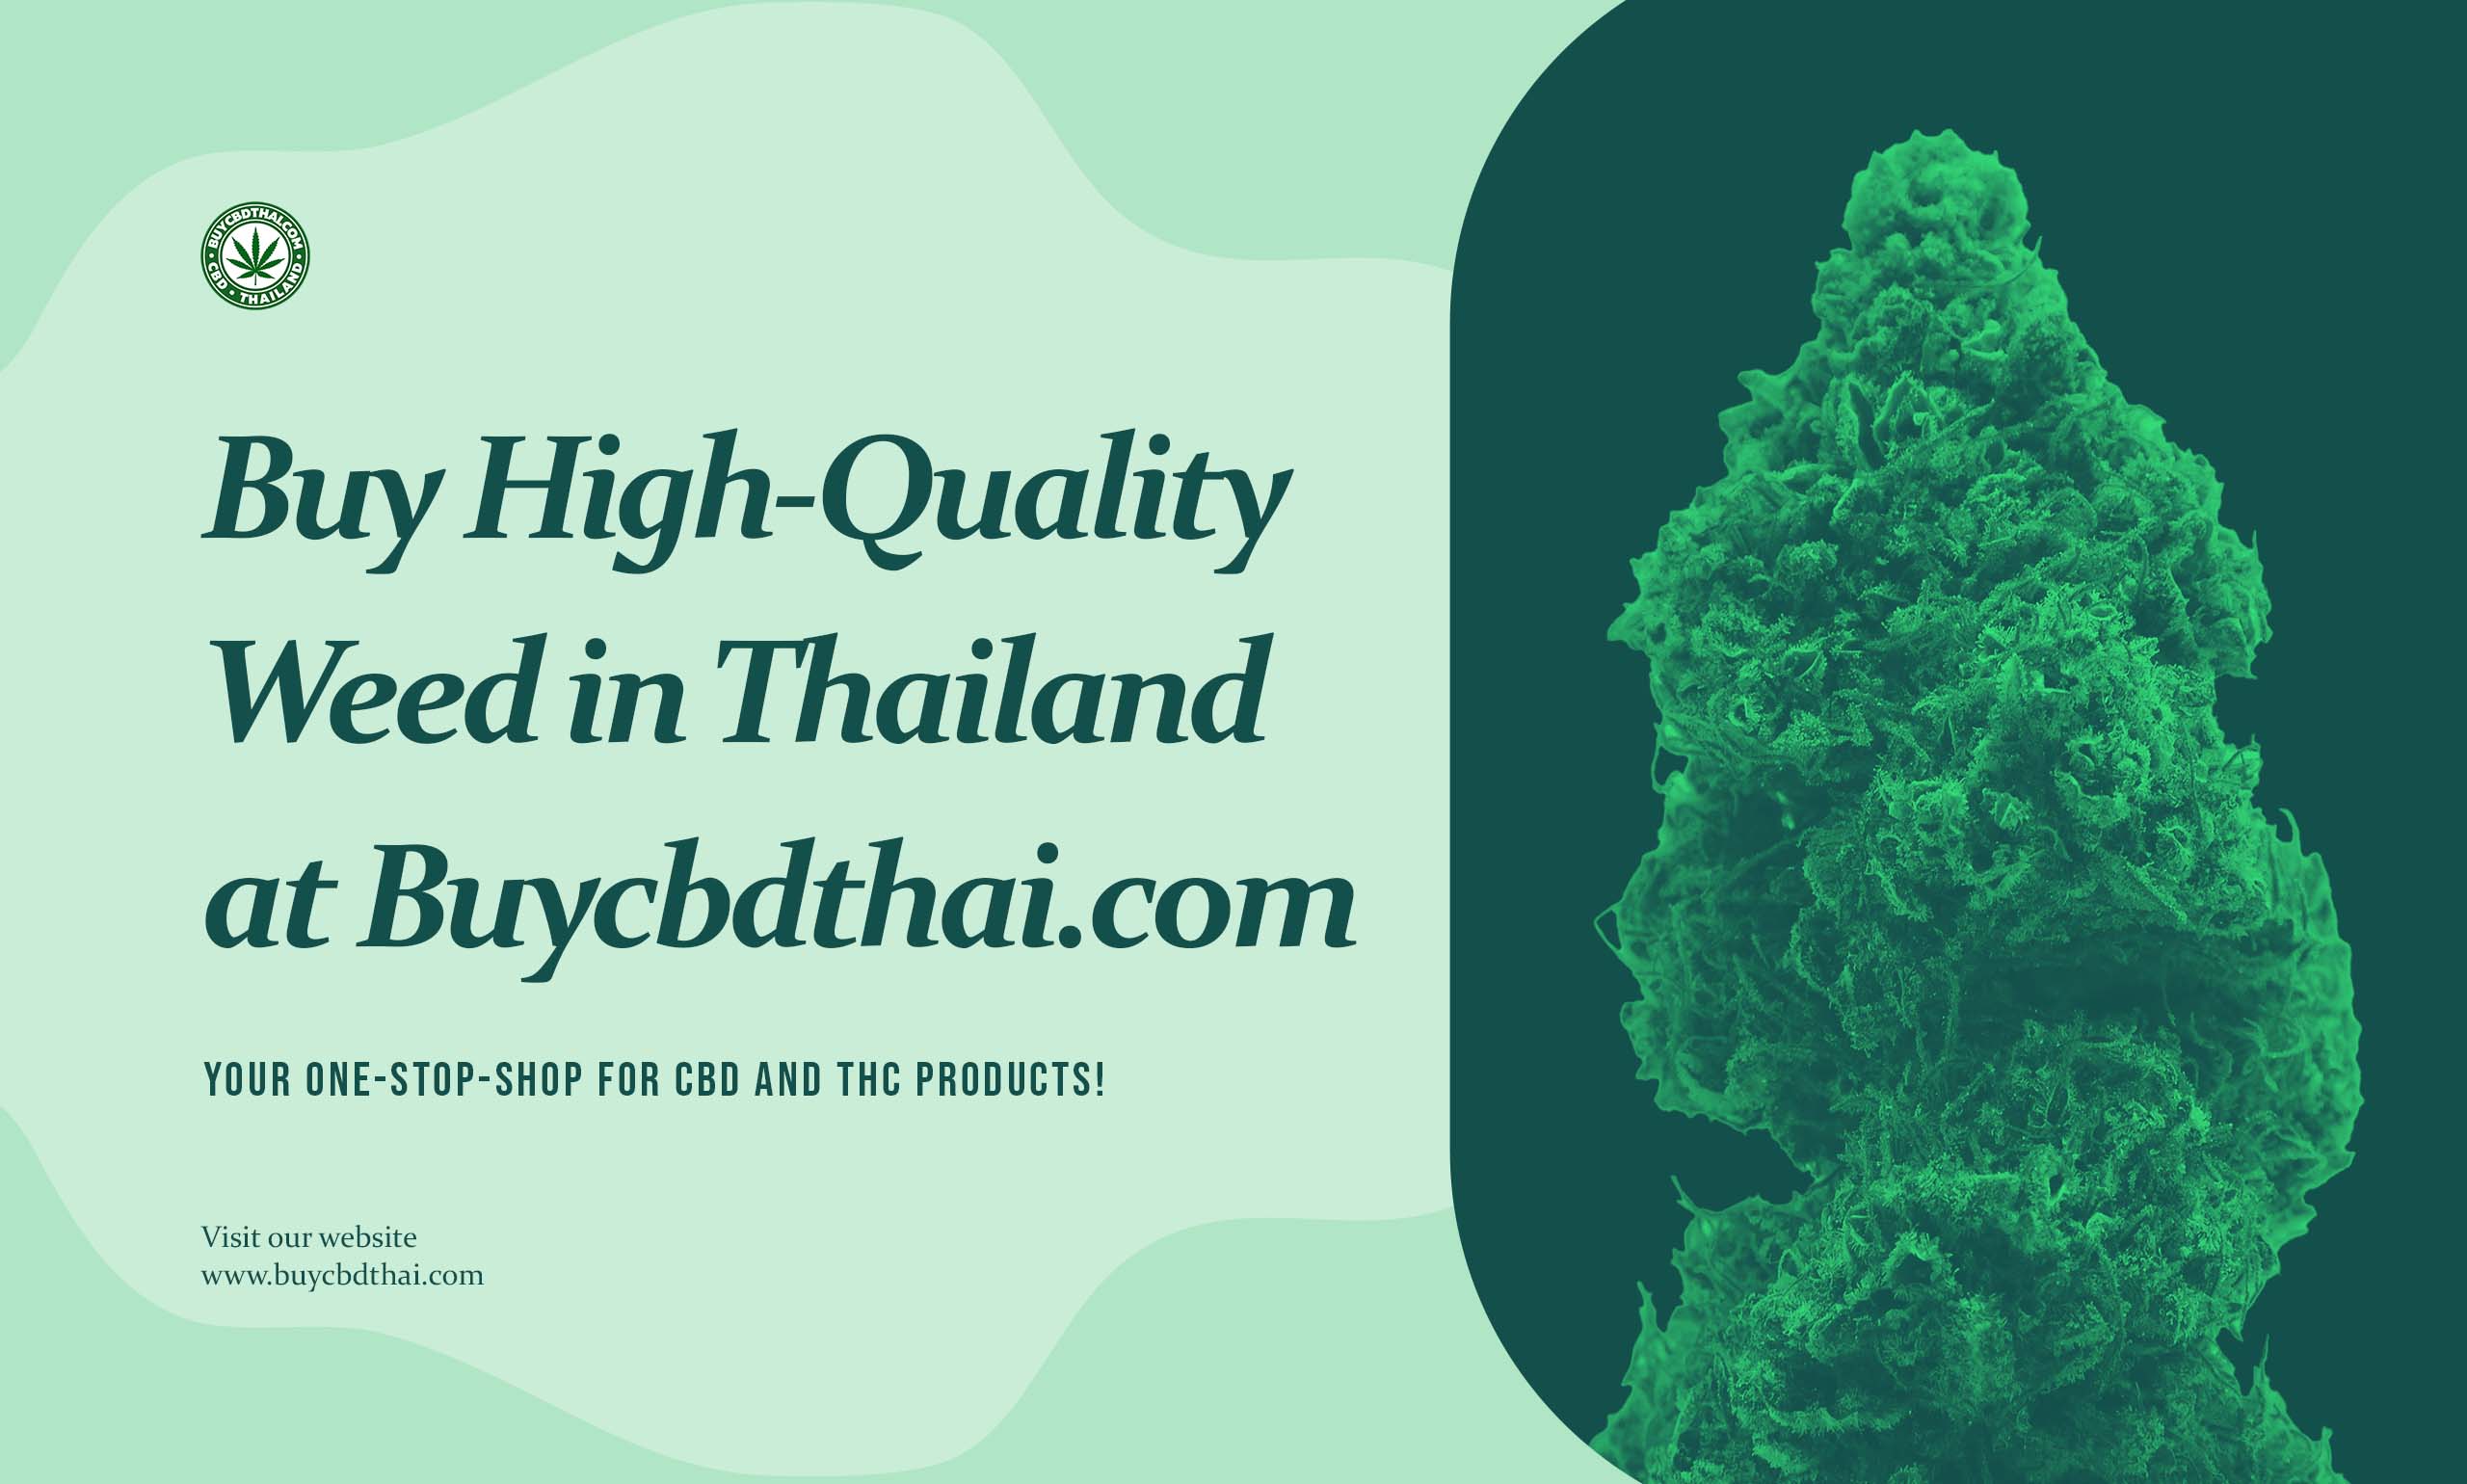 Buy High-Quality Weed in Thailand at Buycbdthai.com